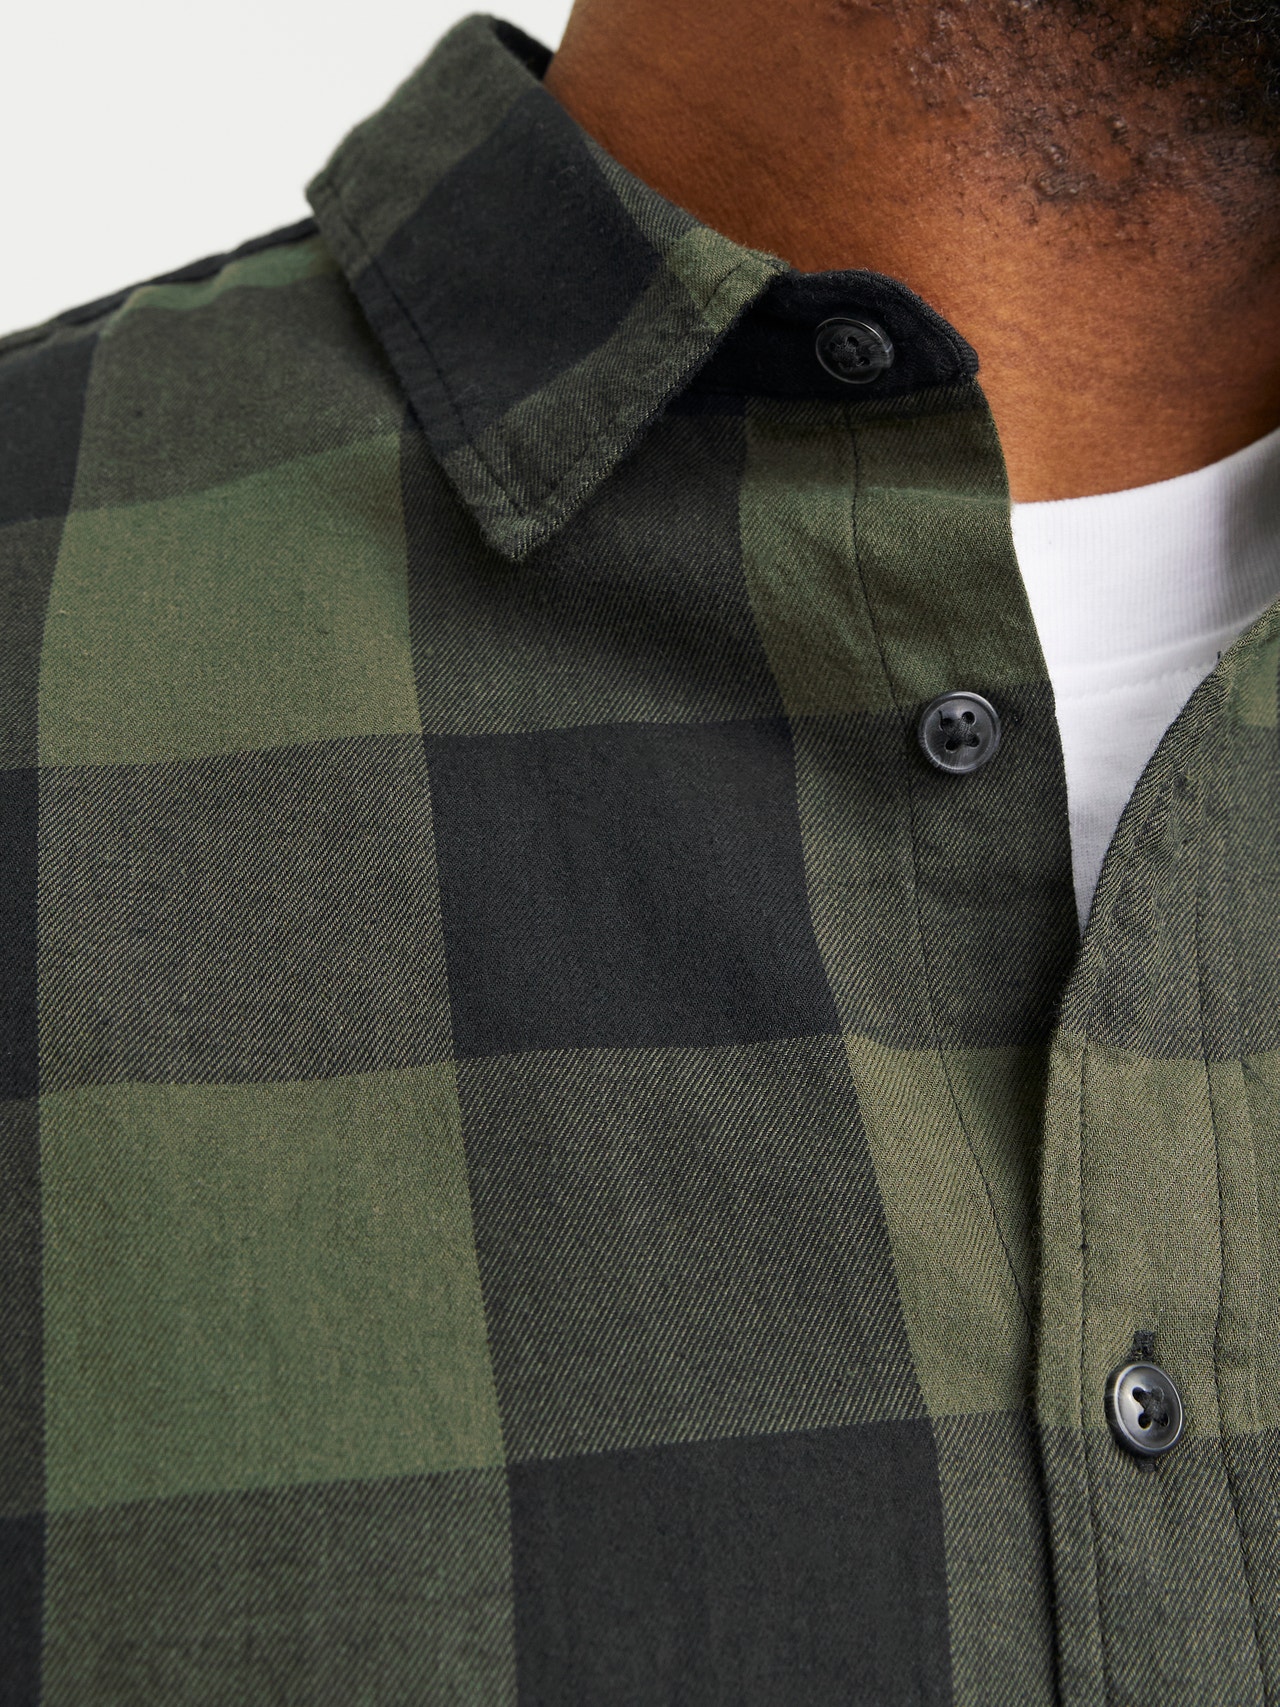 Jack & Jones Plus Loose Fit Checked shirt -Dusty Olive - 12183107